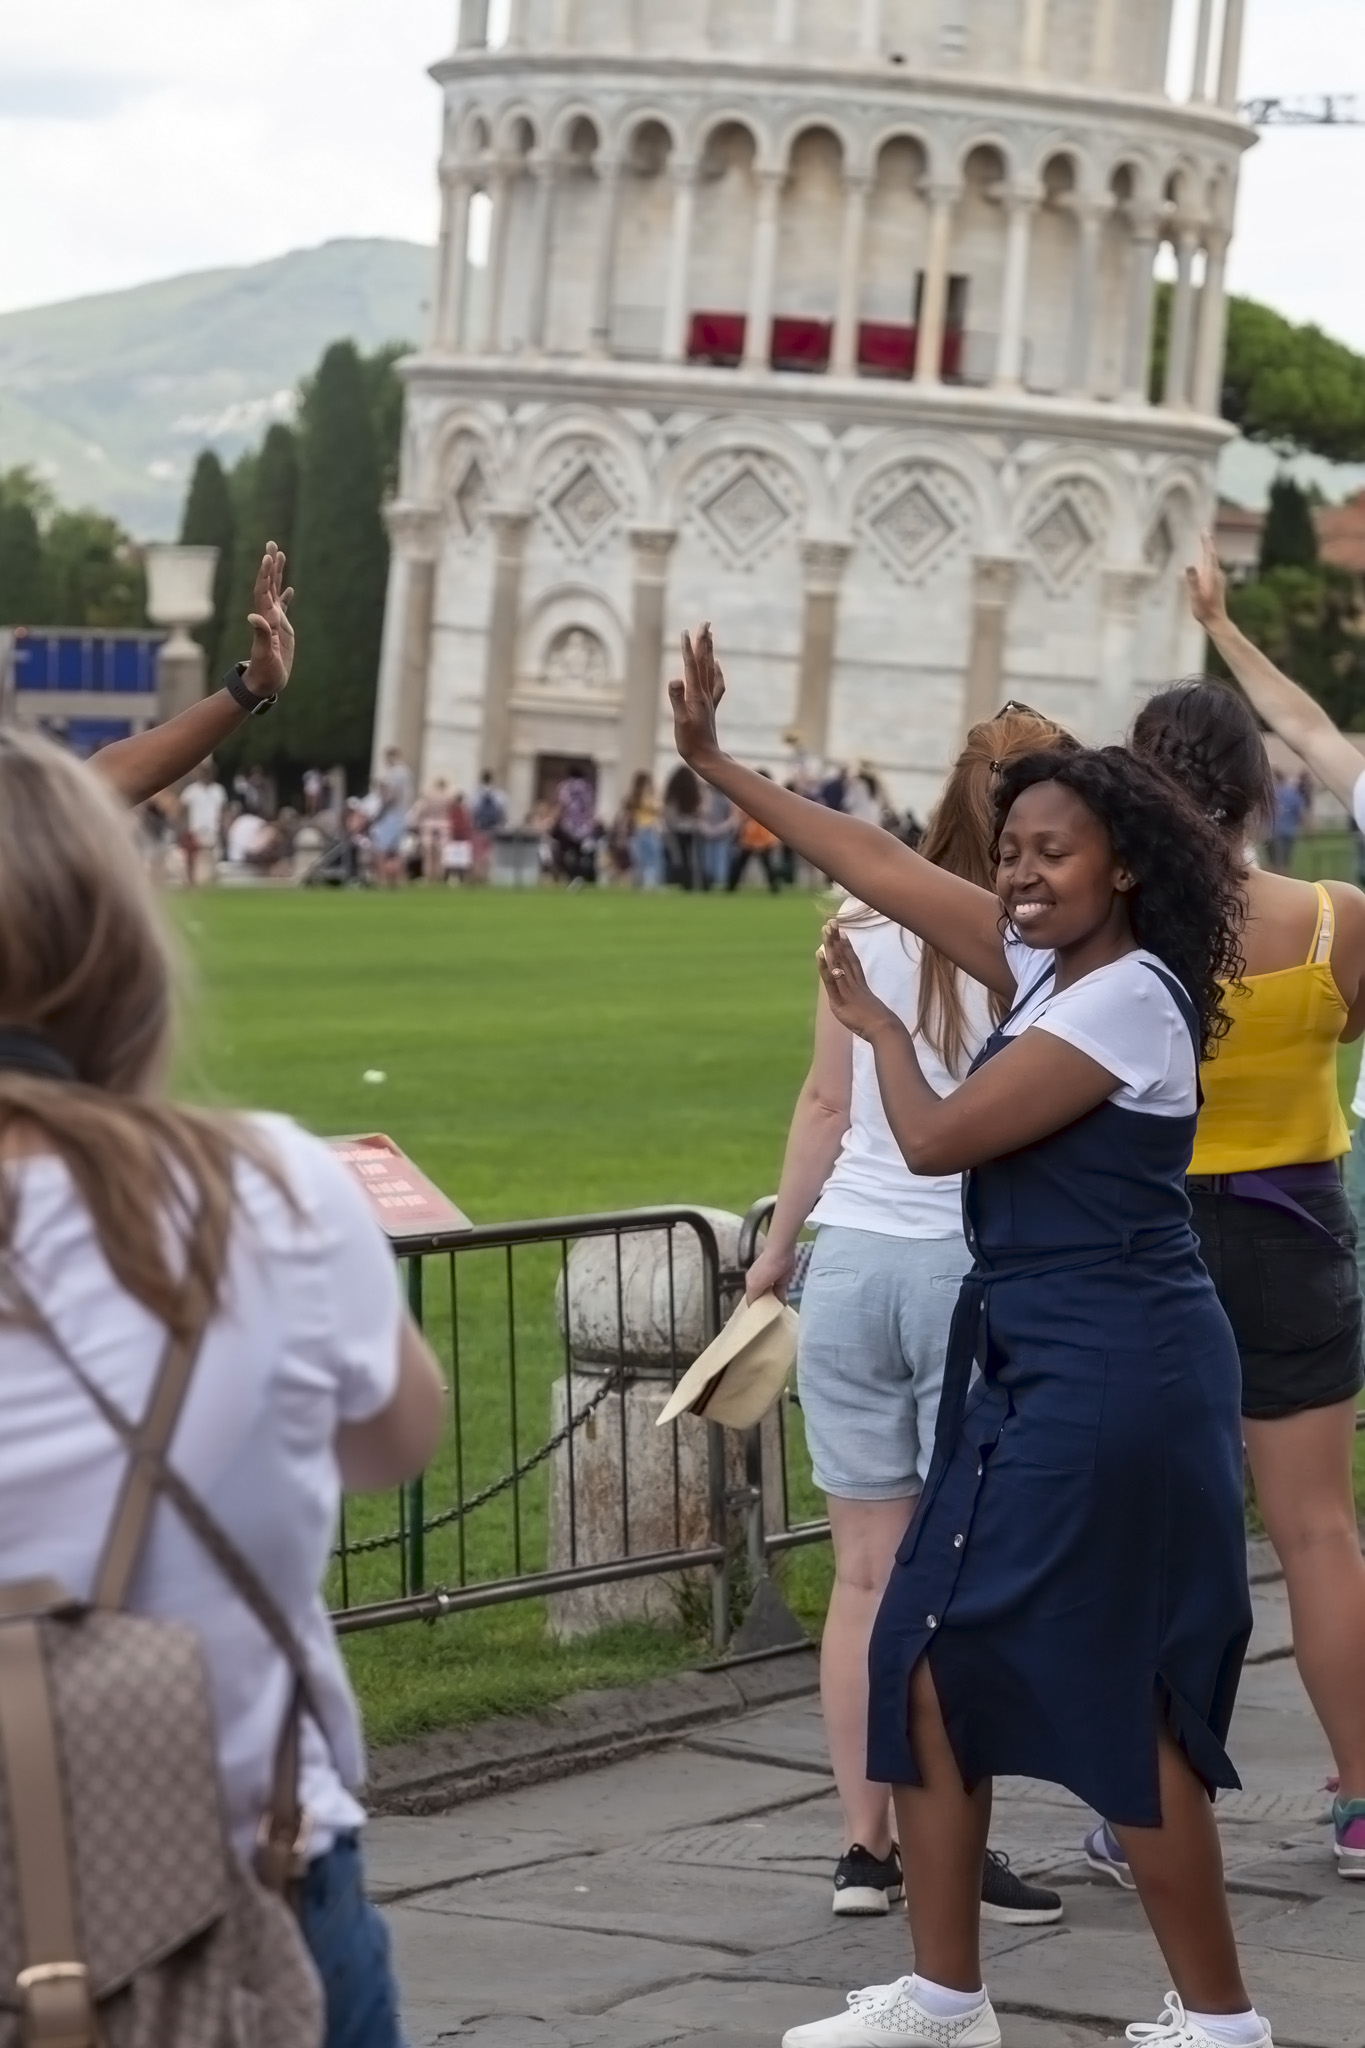 Joe Swash and Alison Hammond pose for VERY rude pic with the Leaning Tower  of Pisa - then delete it | The Sun